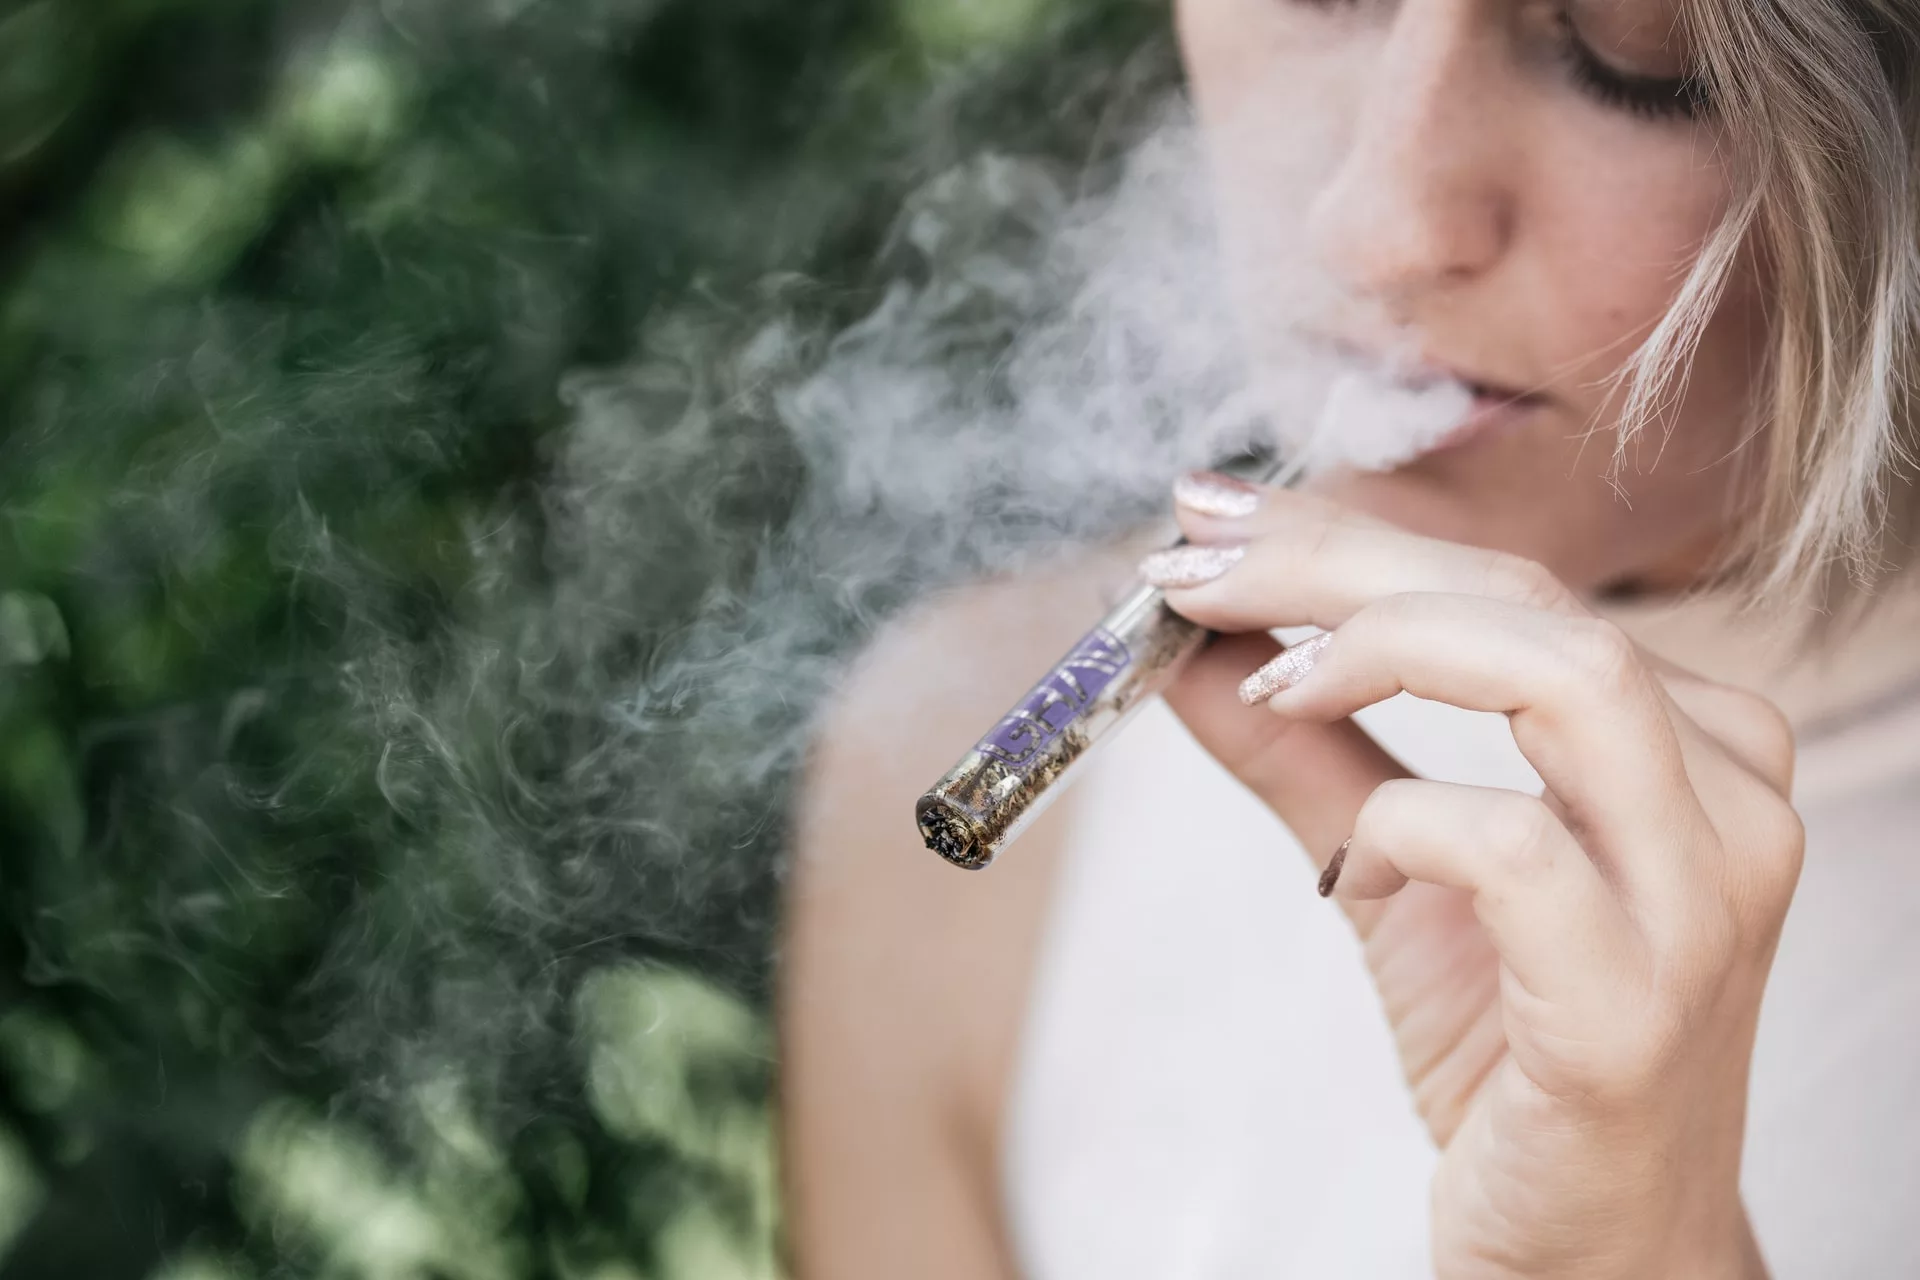 This story behind ecigarette will haunt you forever! – 10 life-changing tips